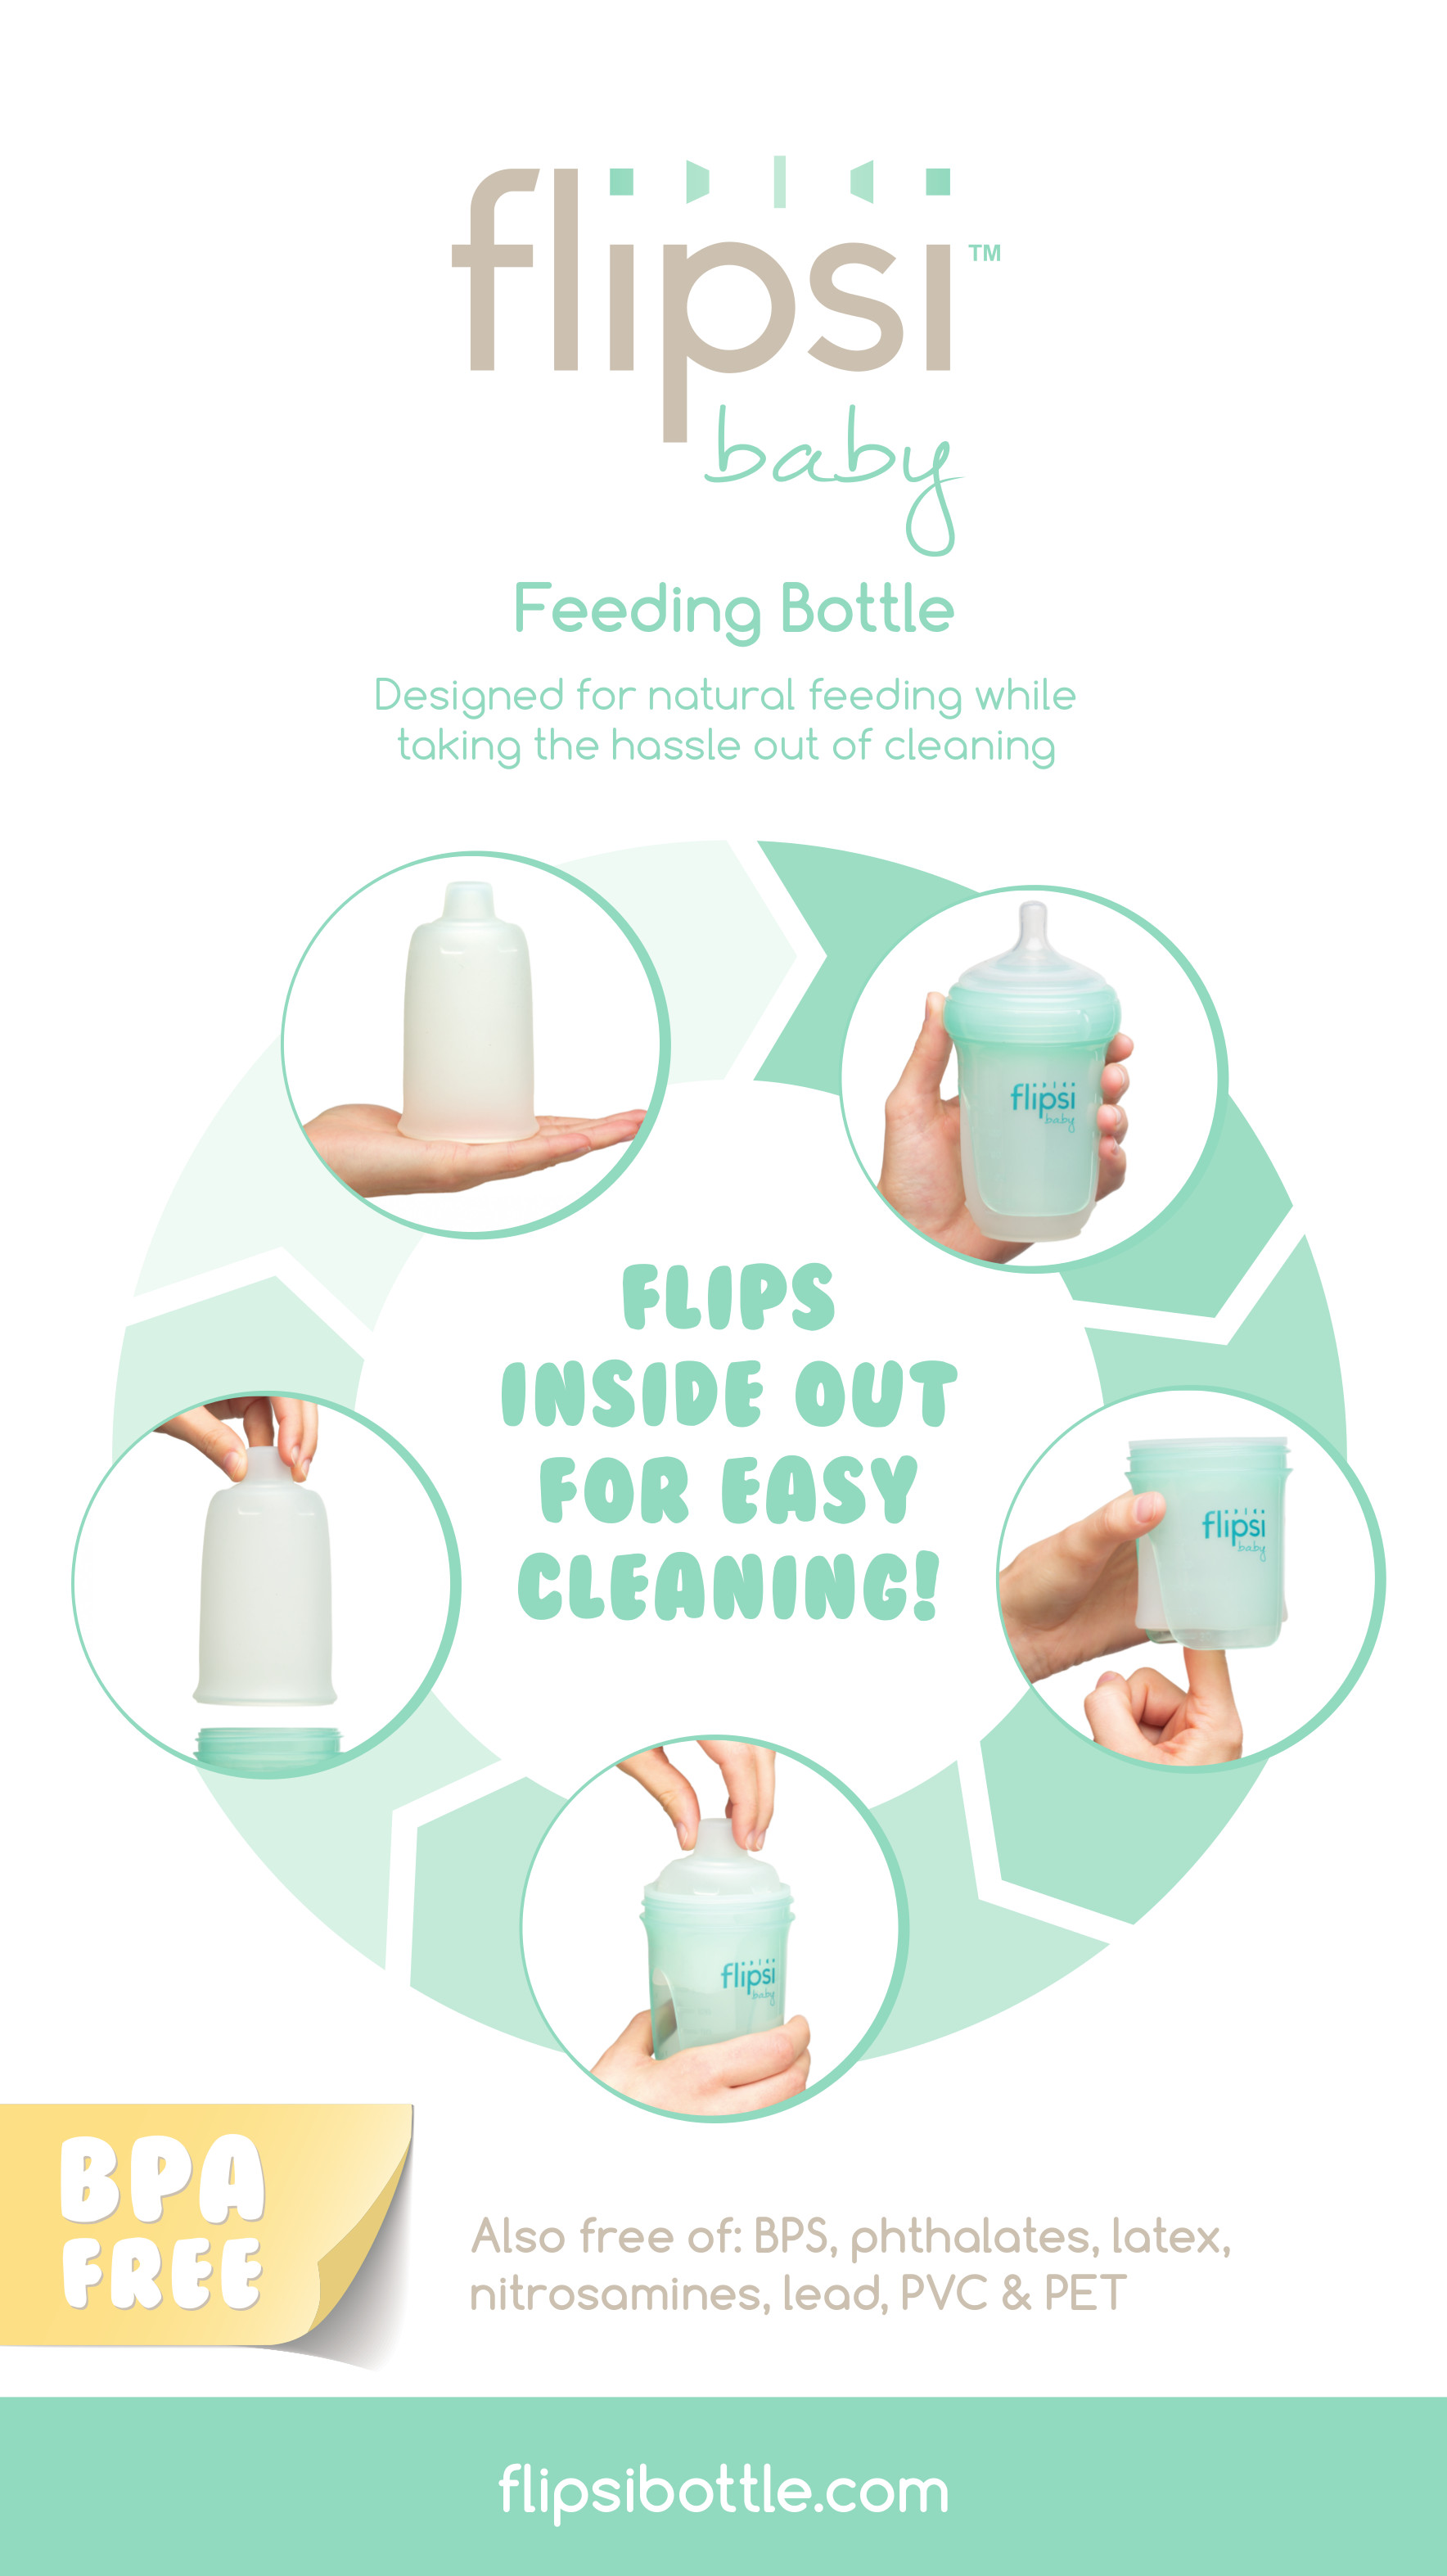 Flipsi Baby can be used with breast milk or formula and is extremely durable.